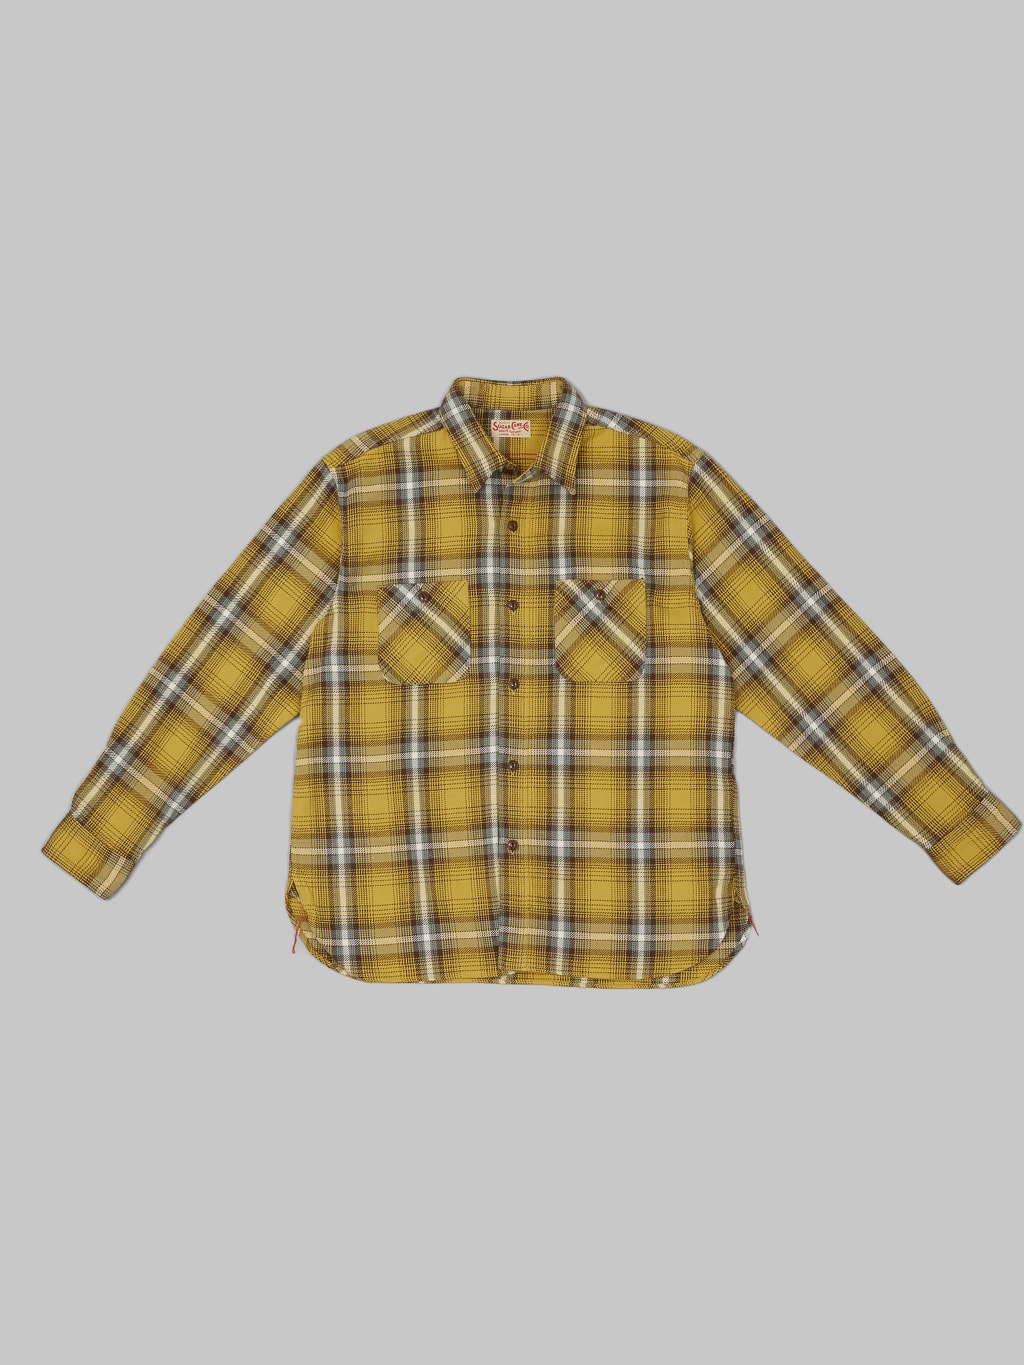 sugar cane twill check work shirt flannel yellow front